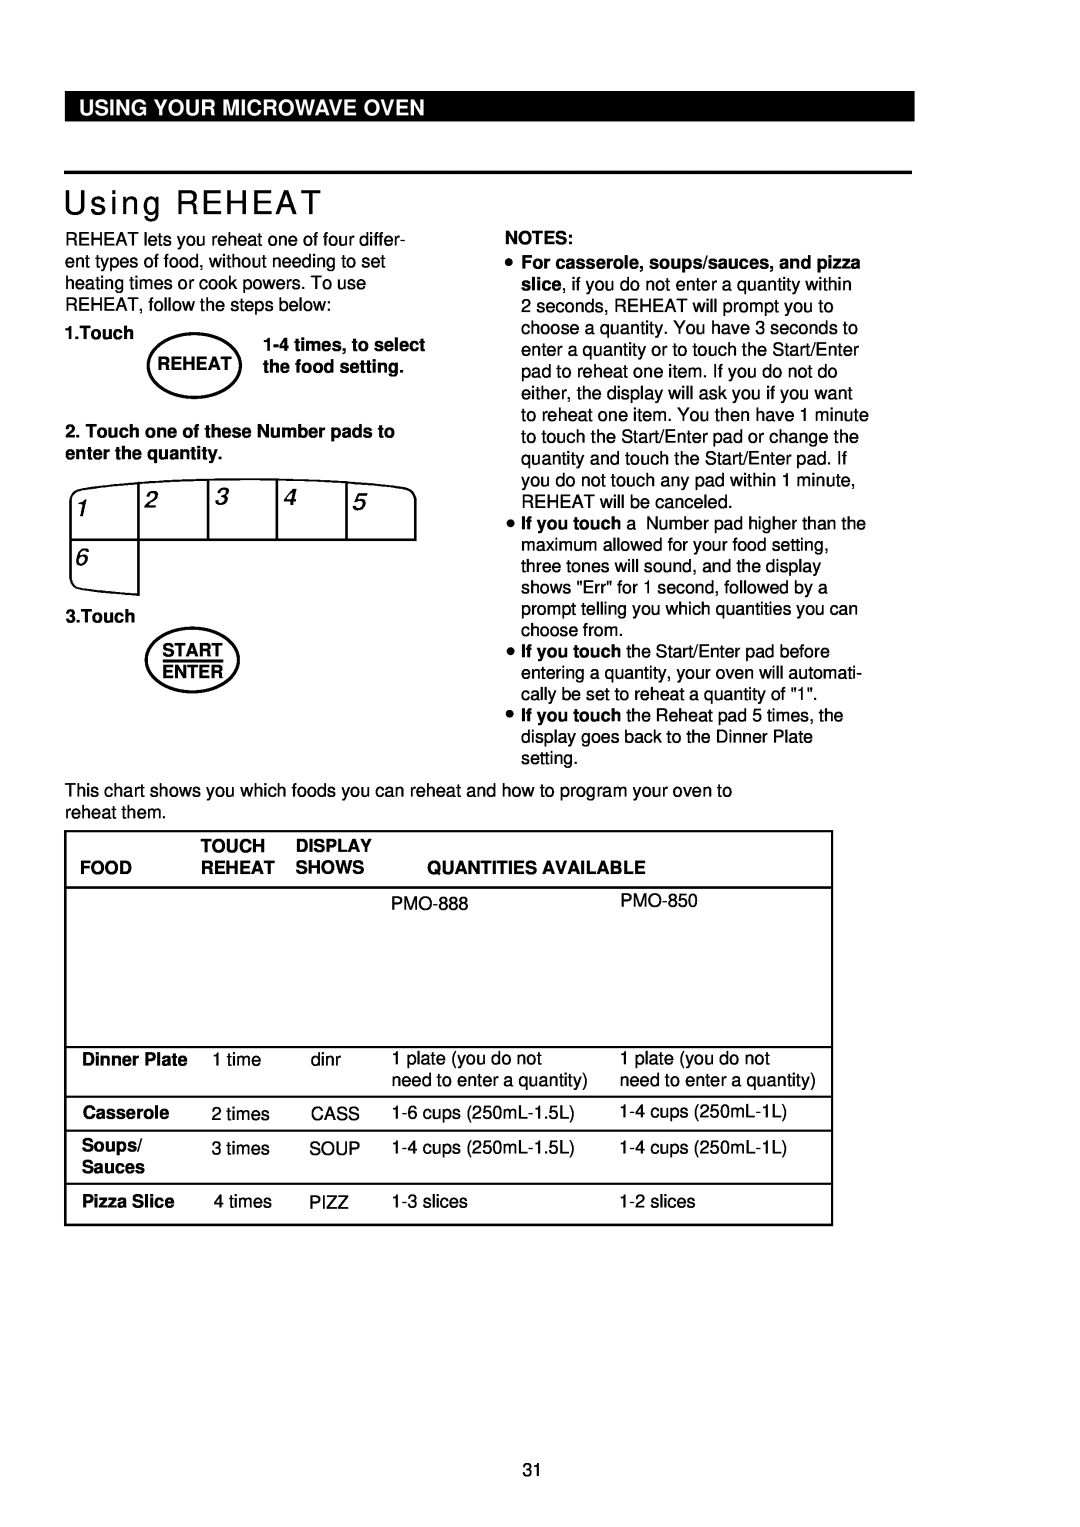 Palsonic PMO-888, PMO-850 installation instructions Using REHEAT, Using Your Microwave Oven 